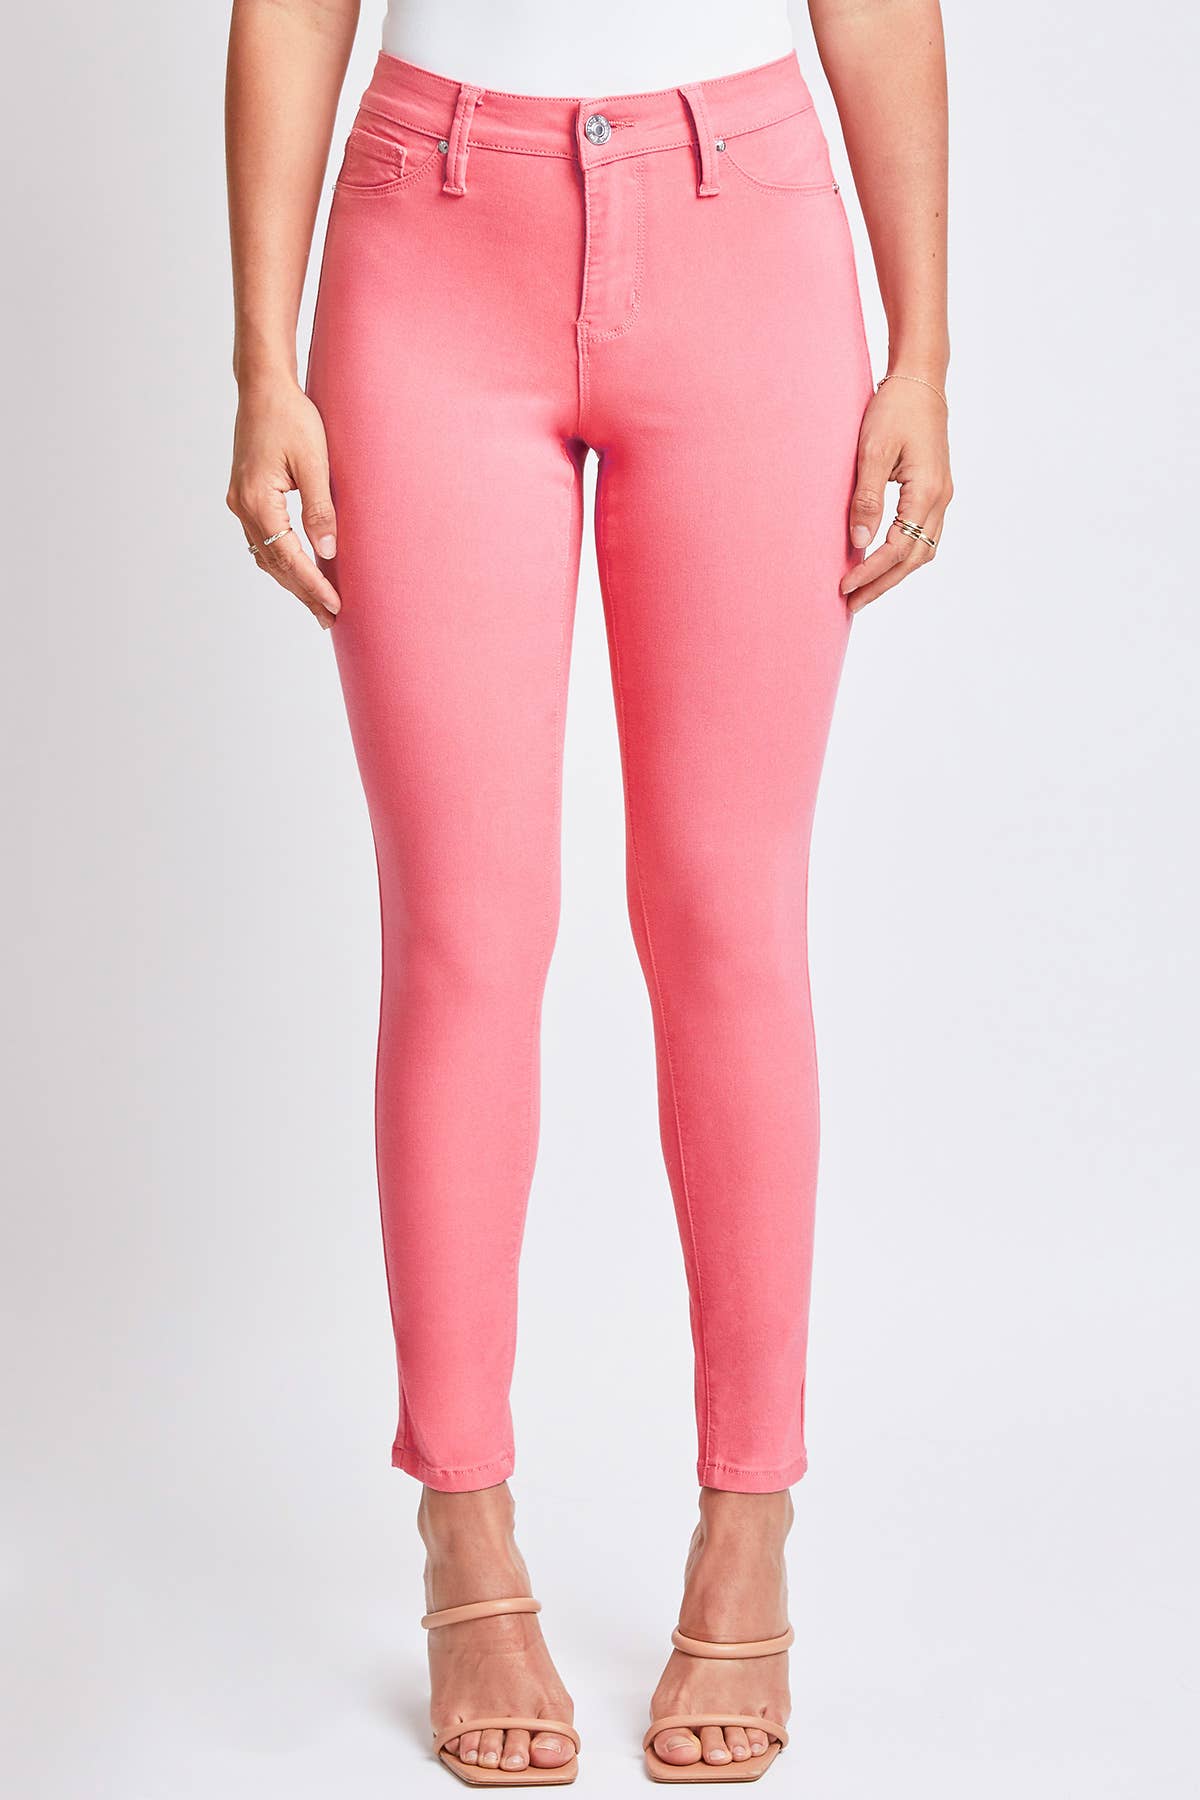 Hyperstretch Mid-Rise Skinny Jean: XL / Junior / Shell Pink